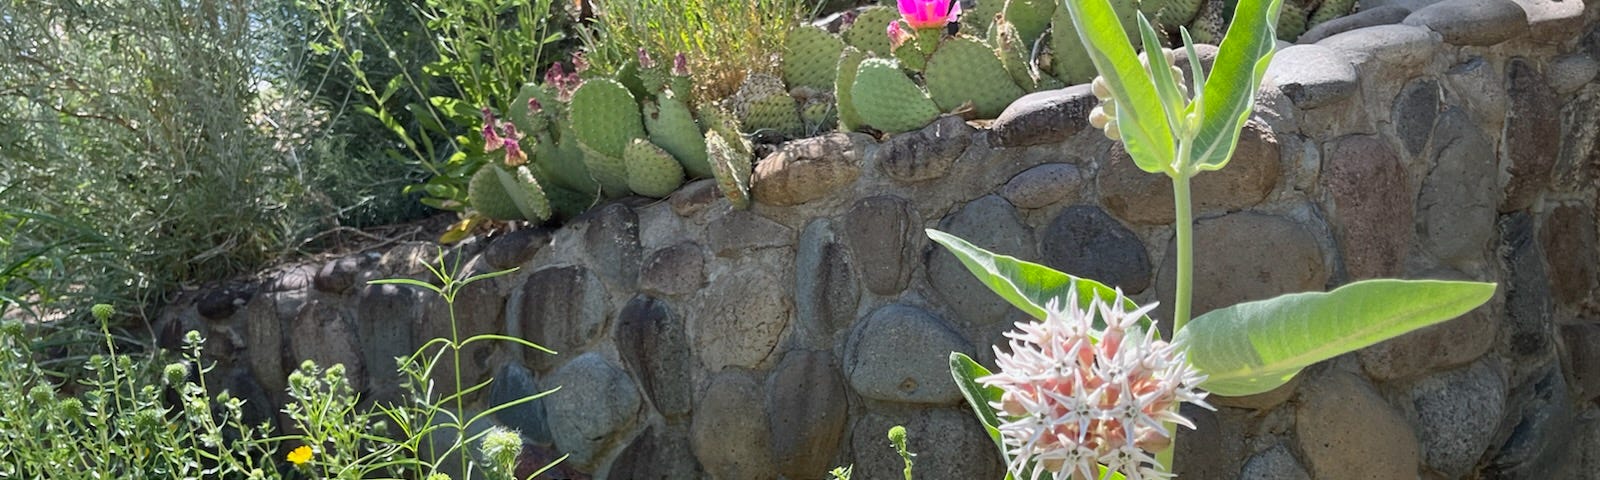 A variety of blooming wildflowers against a rock retaining wall.